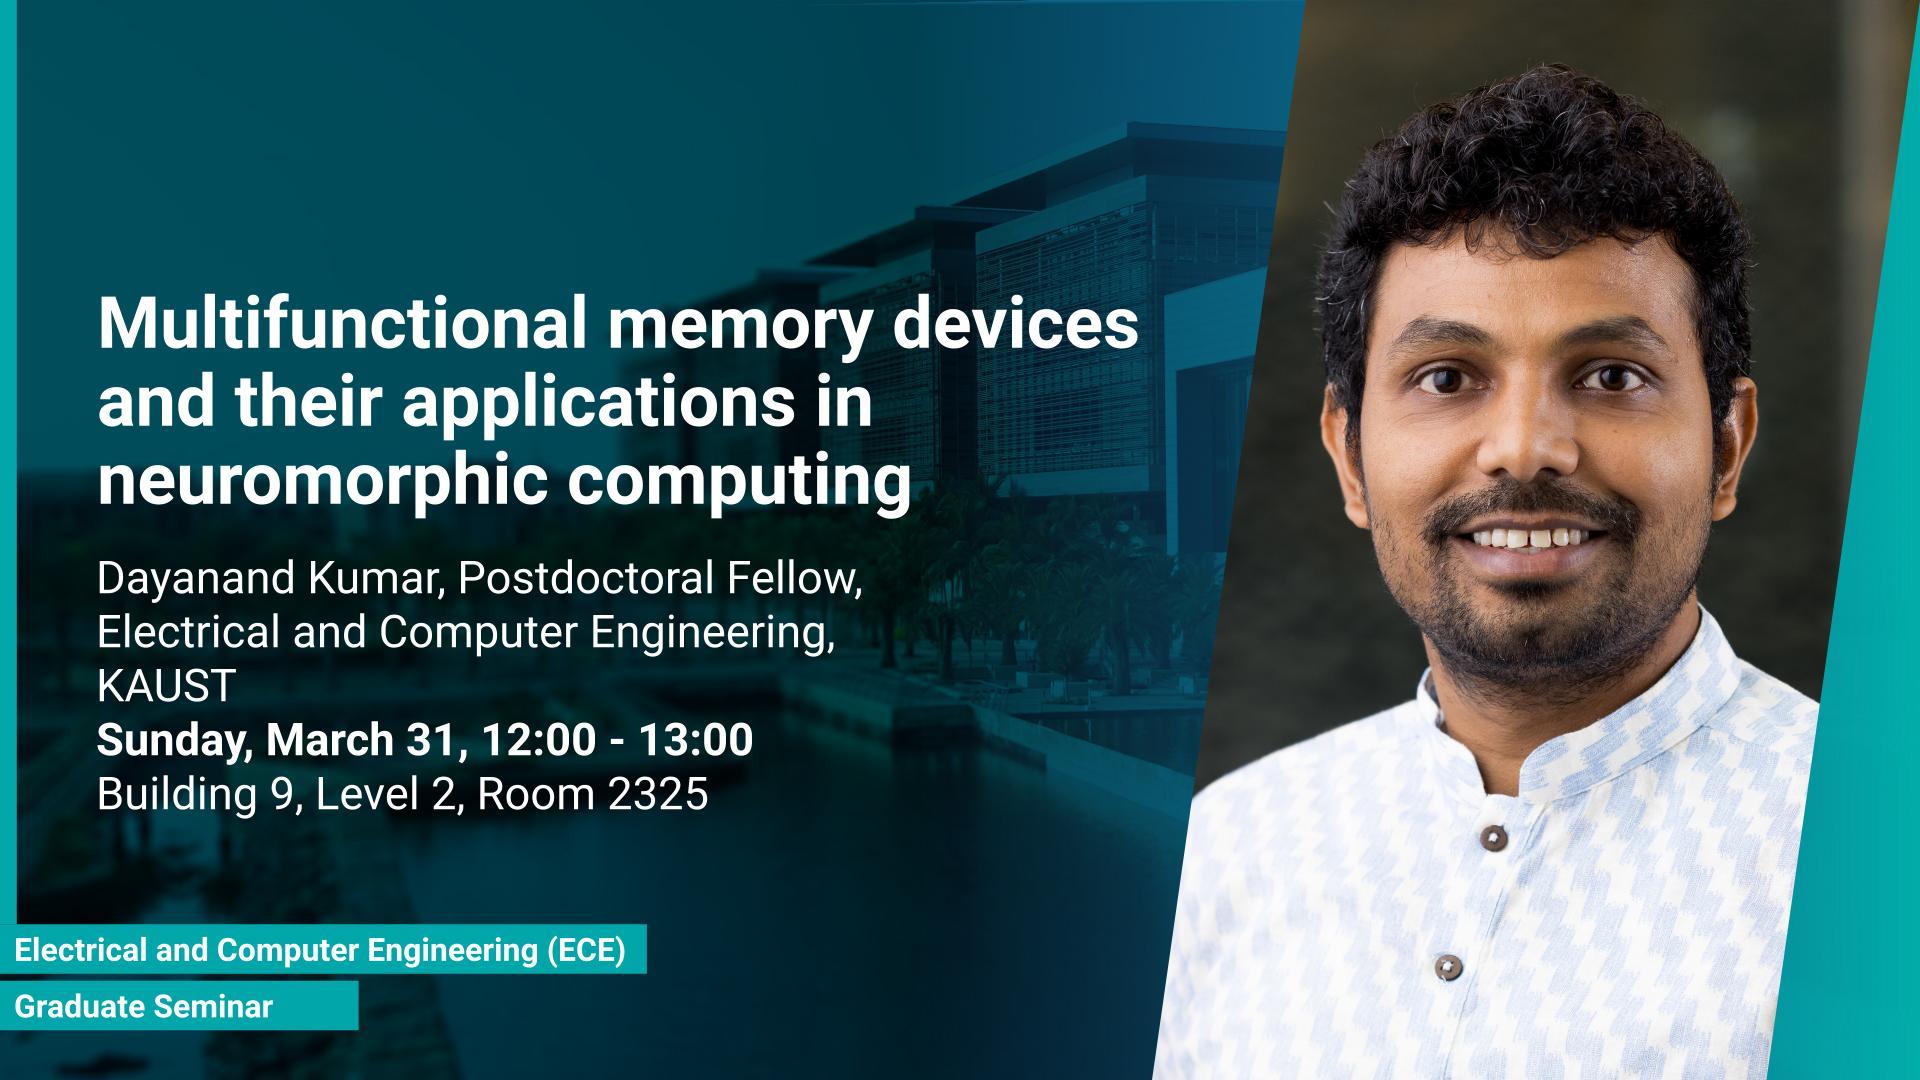 KAUST-CEMSE-ECE-GraduateSeminar-Dayanand-Kumar-Multifunctional-memory-devices-and-their-applications-in-neuromorphic-computing